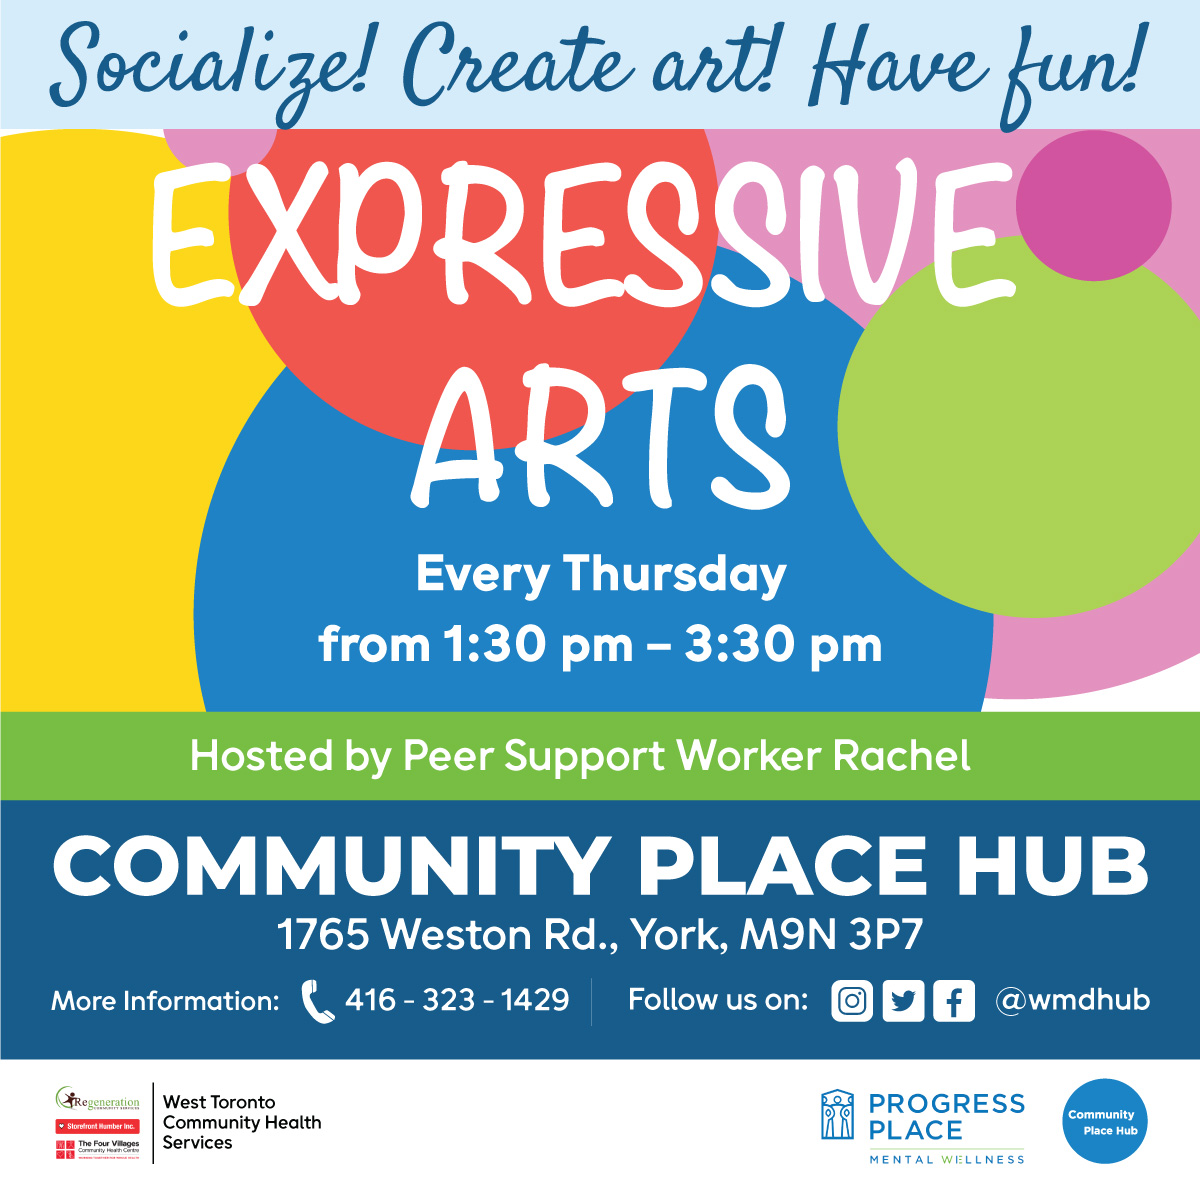 🗒️REMINDER: Don’t forget Art and Peer-to-Peer program today at #CommunityPlaceHub 🖌️#Expressive Art: 1:30 pm - 3:00 pm 💭#Peer-to-peer: 5:00 - 6:00 pm 📍Location: Community Place Hub, 1765 Weston Rd., M9N 3P7 Contact us at 416-323-1429 or communityplacehub@progressplace.org